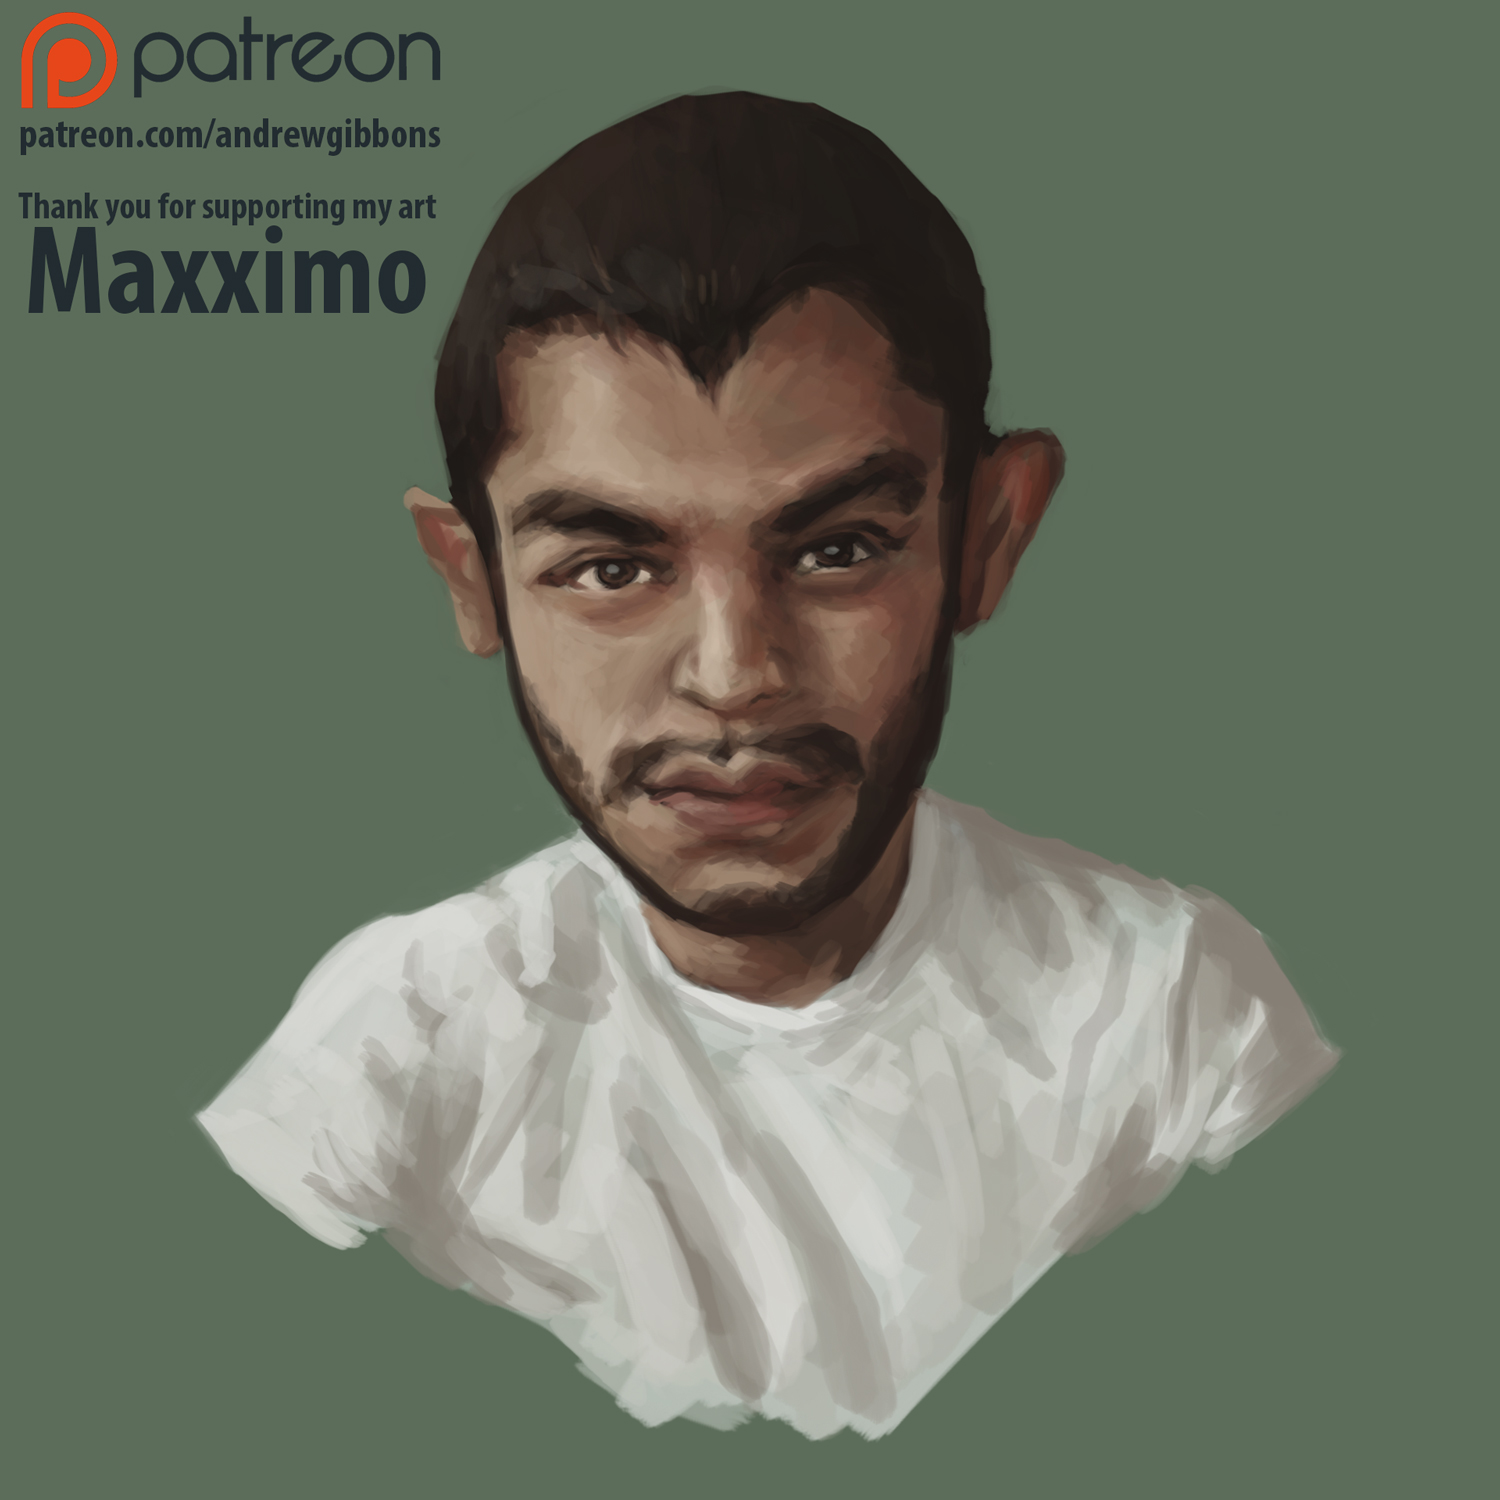 [Image: patron_portrait___maxximo_by_andrew_gibbons-dbg5ysf.jpg]